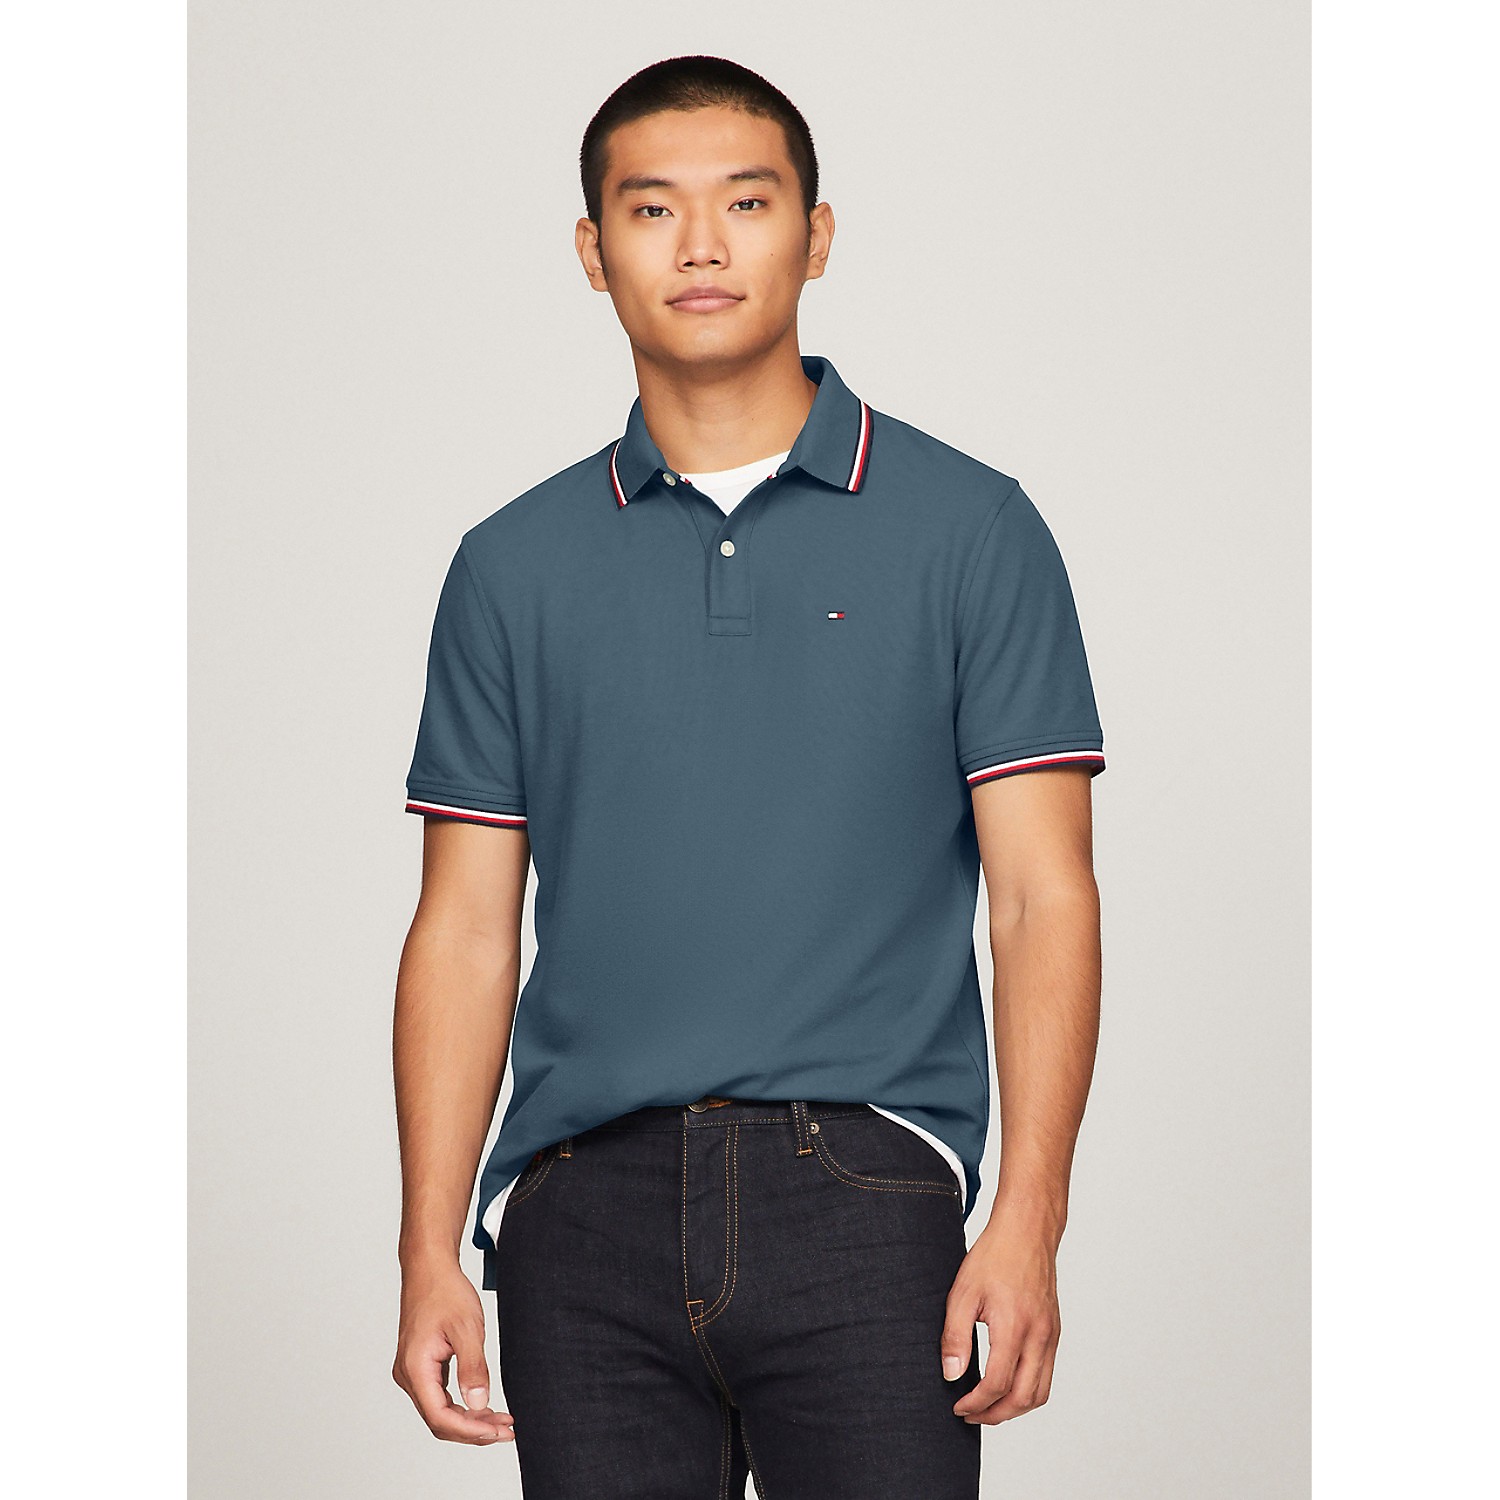 TOMMY HILFIGER Regular Fit Tommy Wicking Polo